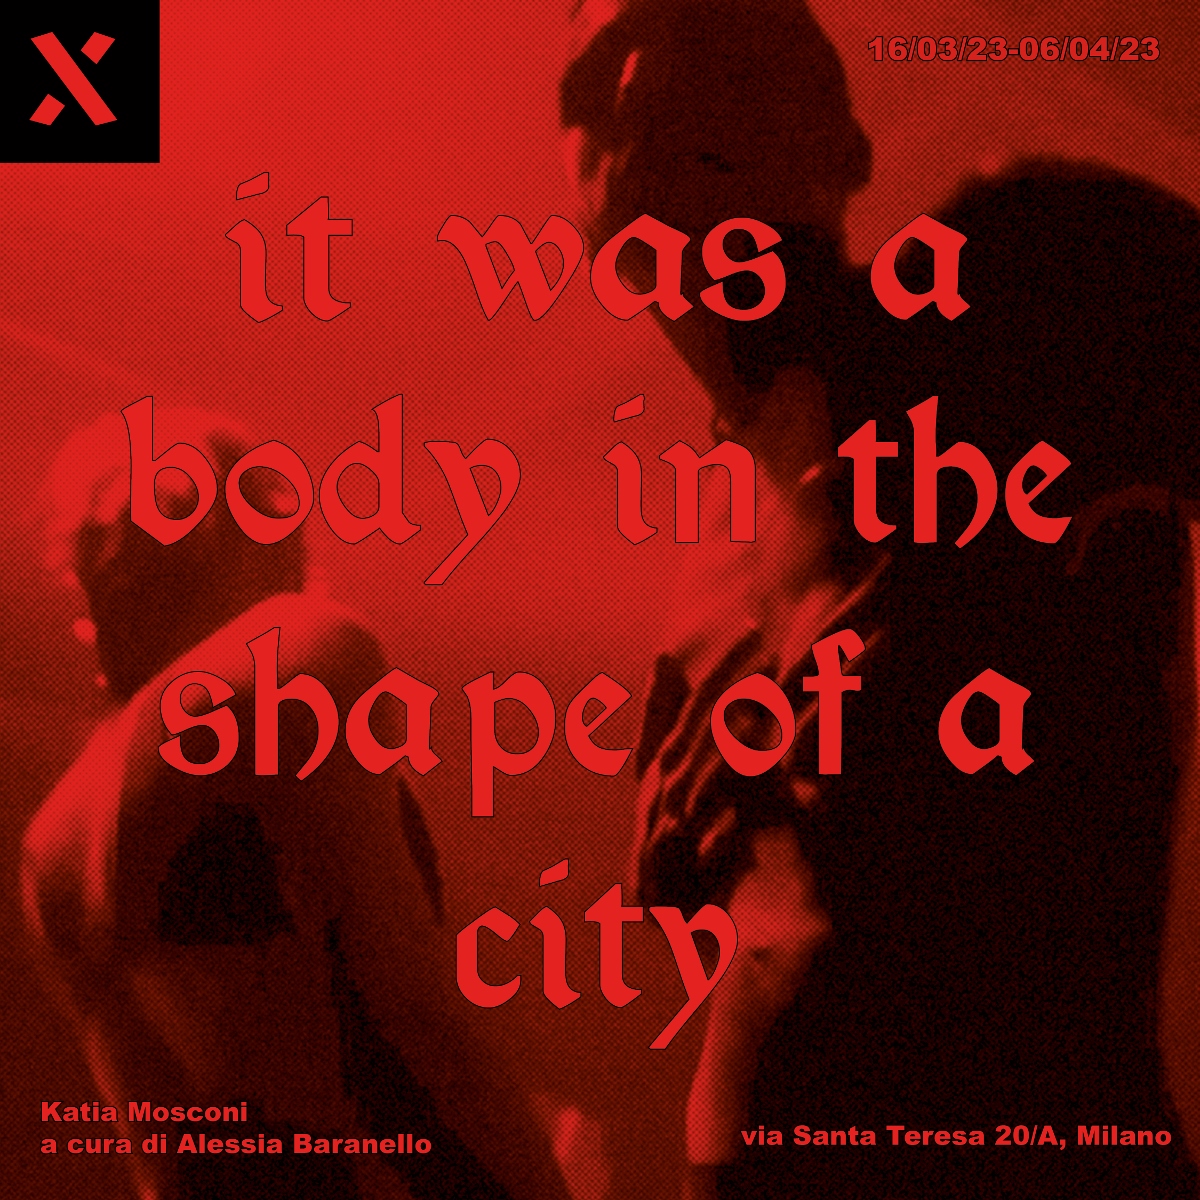 Katia Mosconi – It was a body in the shape of a city